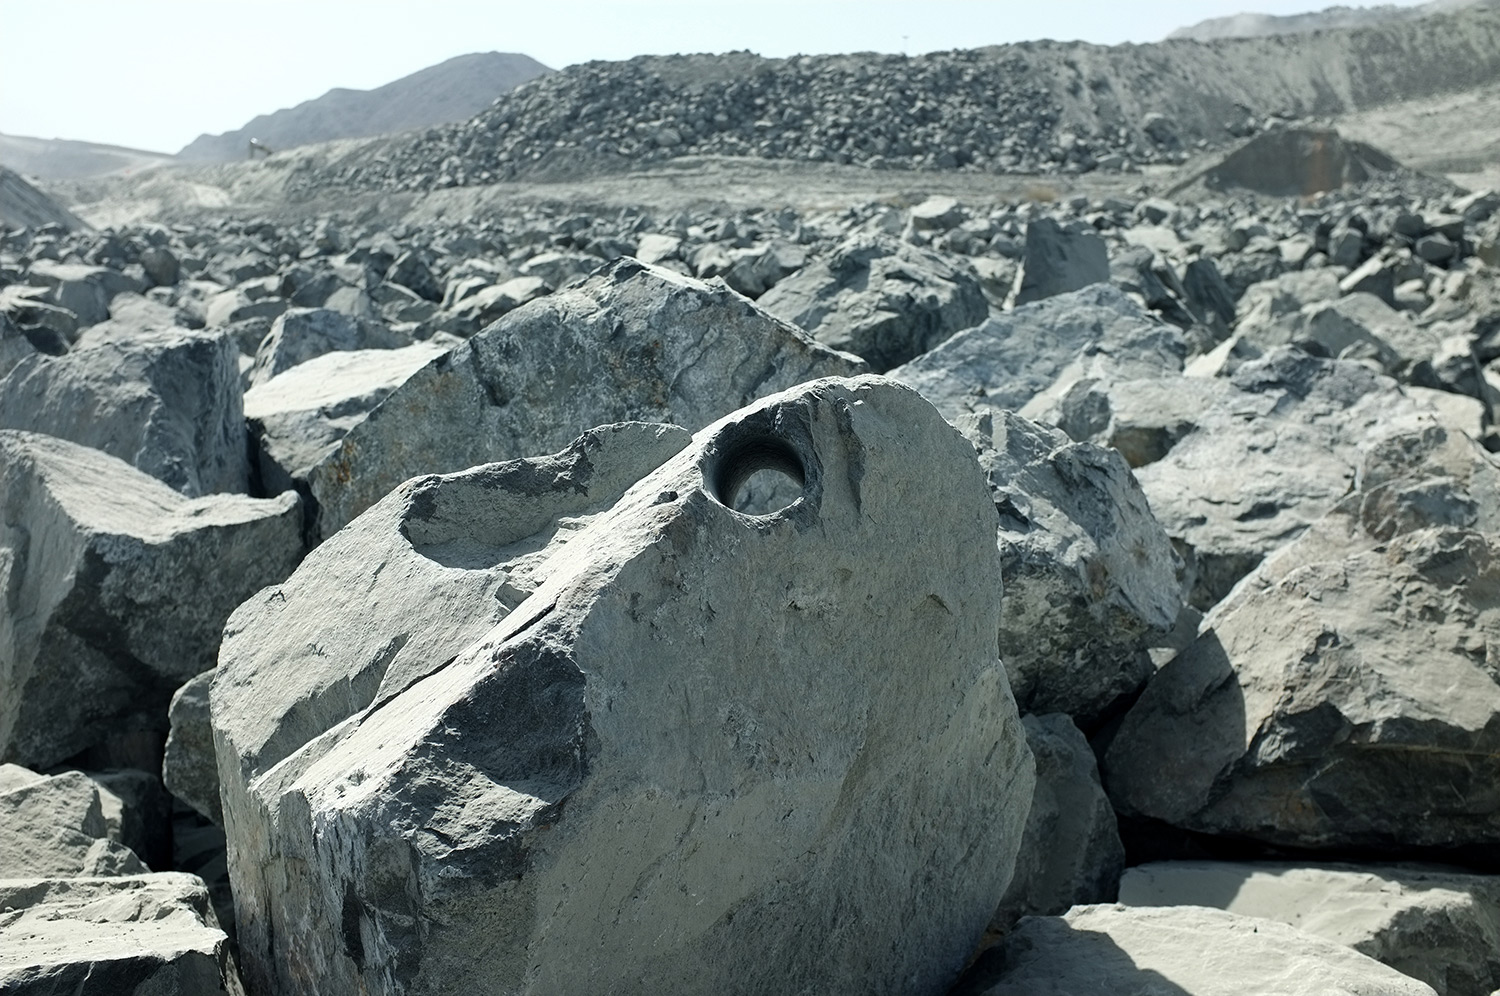  Boulder with hole, Quarry yard, Fujairah  Research image 